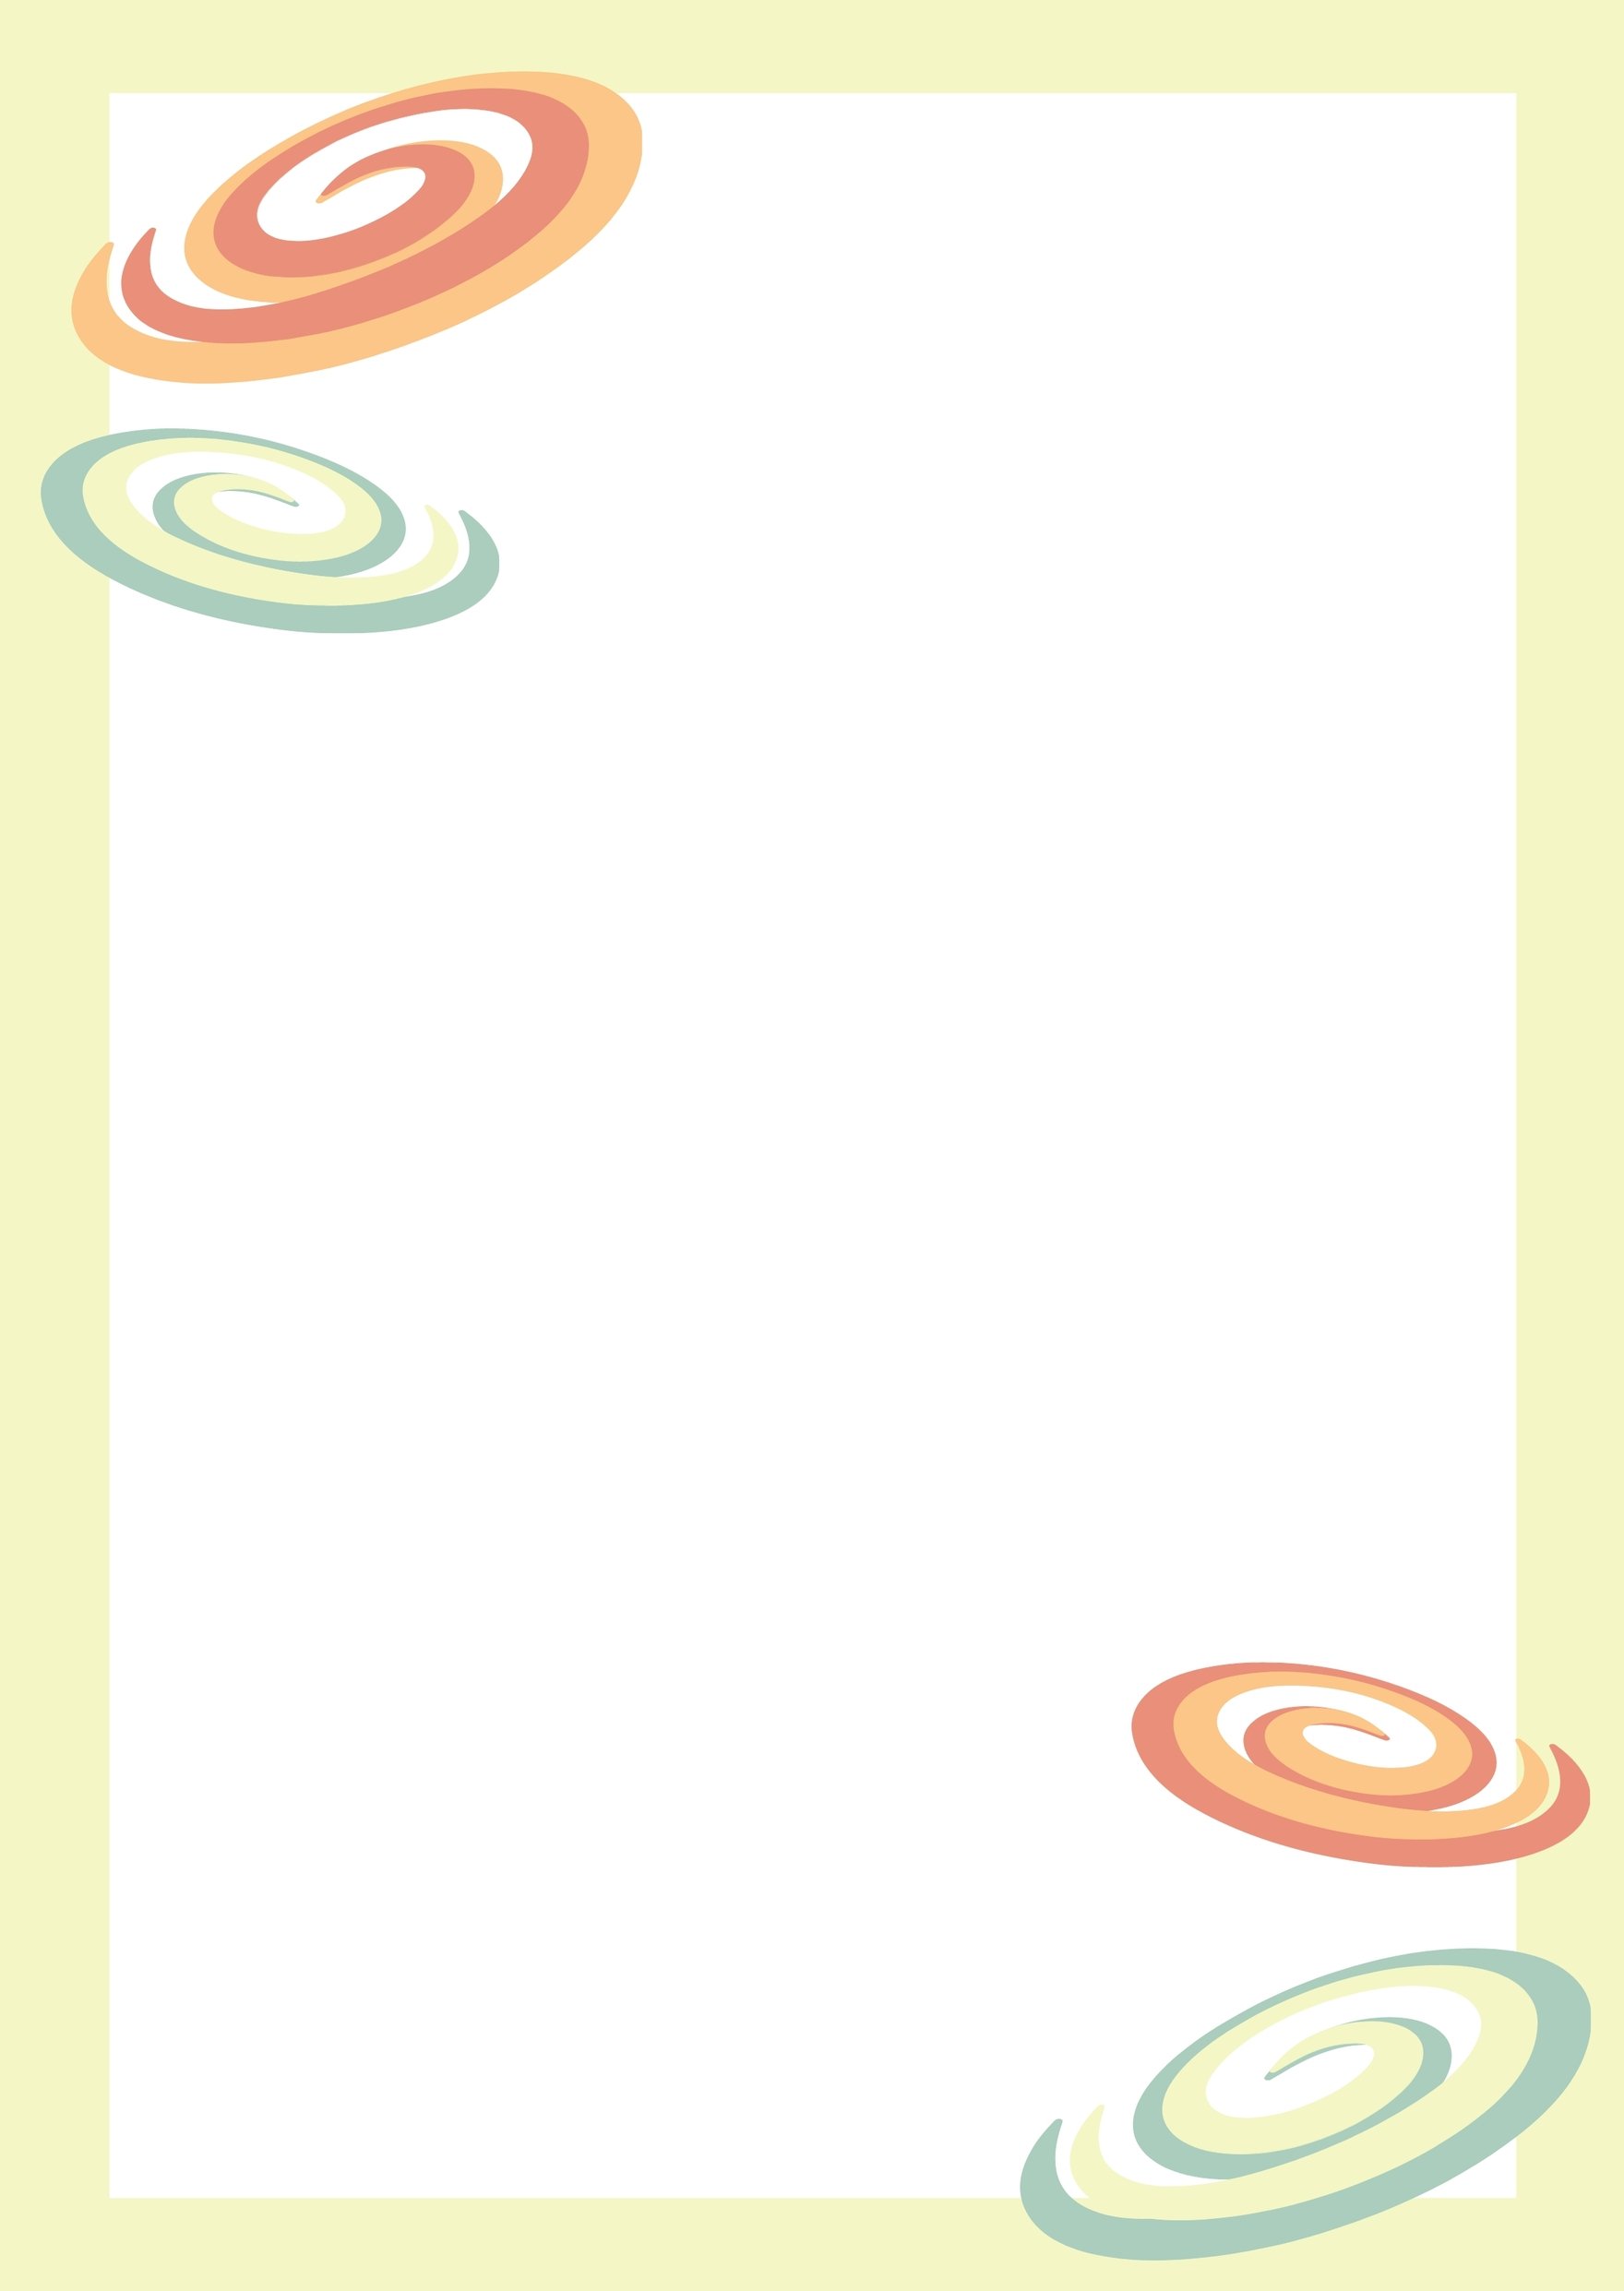 Swirl Page Border Template